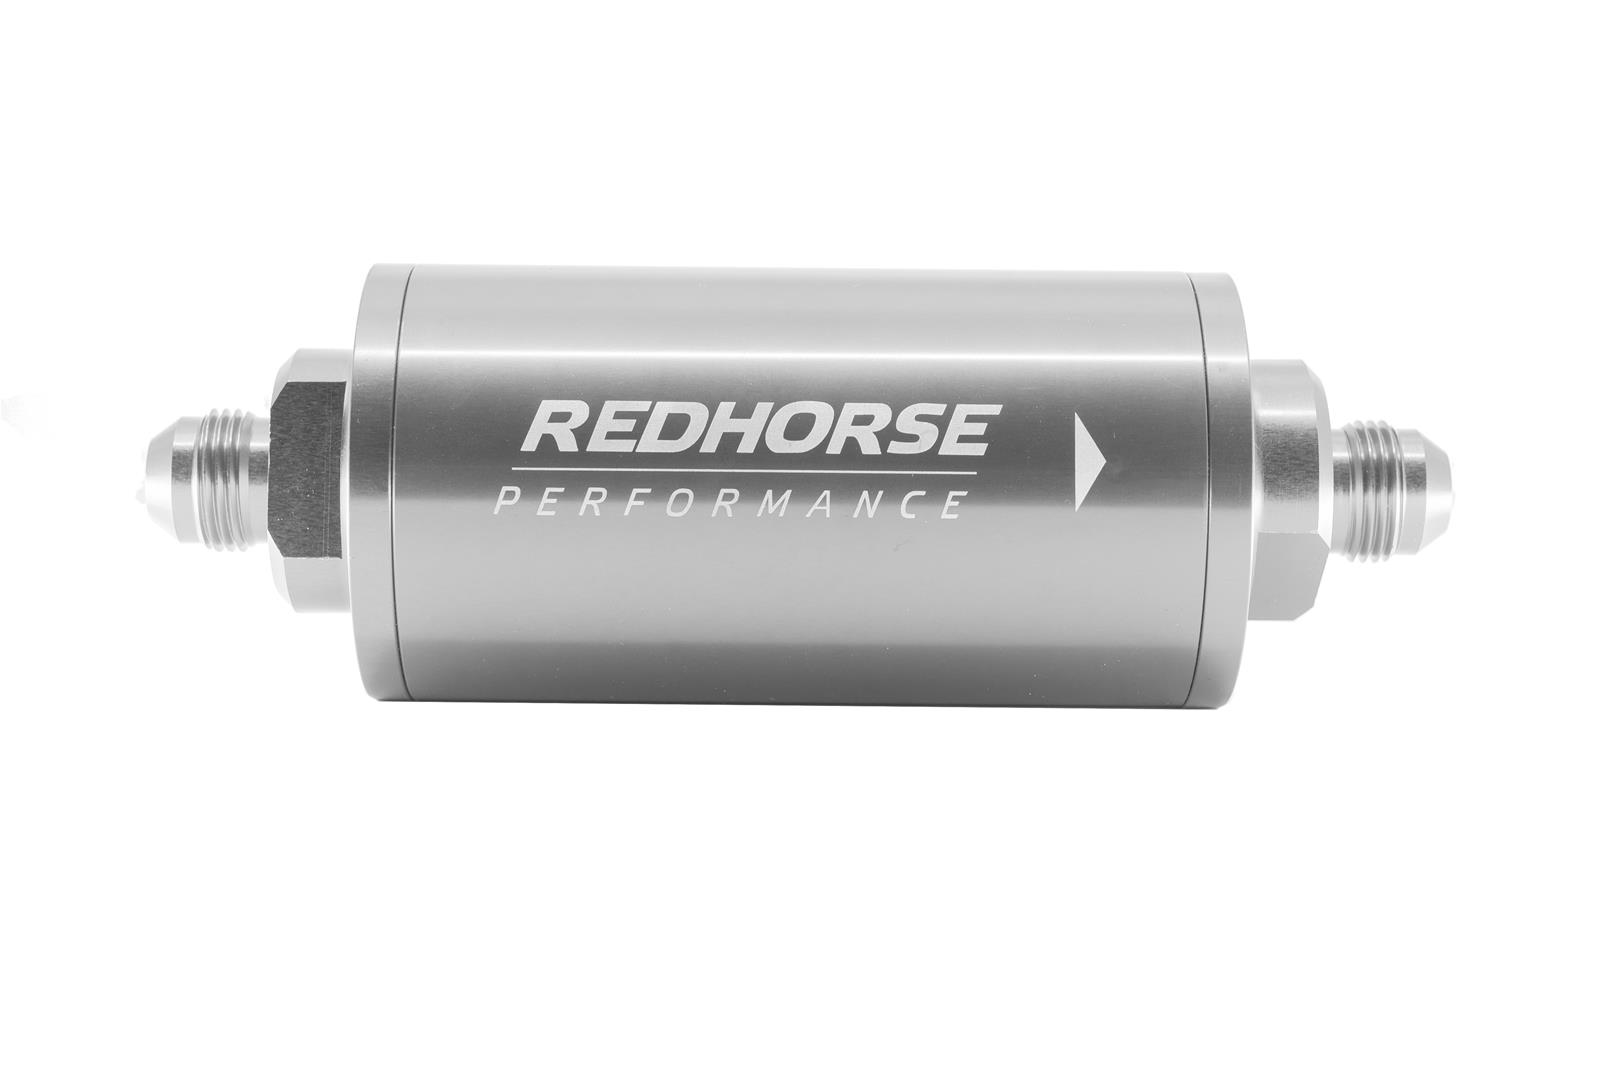 Redhorse Performance 4651-08-5-10 6in Cylindrical In-Line Race Fuel Filter w/ 10 Micron S.S. element - 08 AN